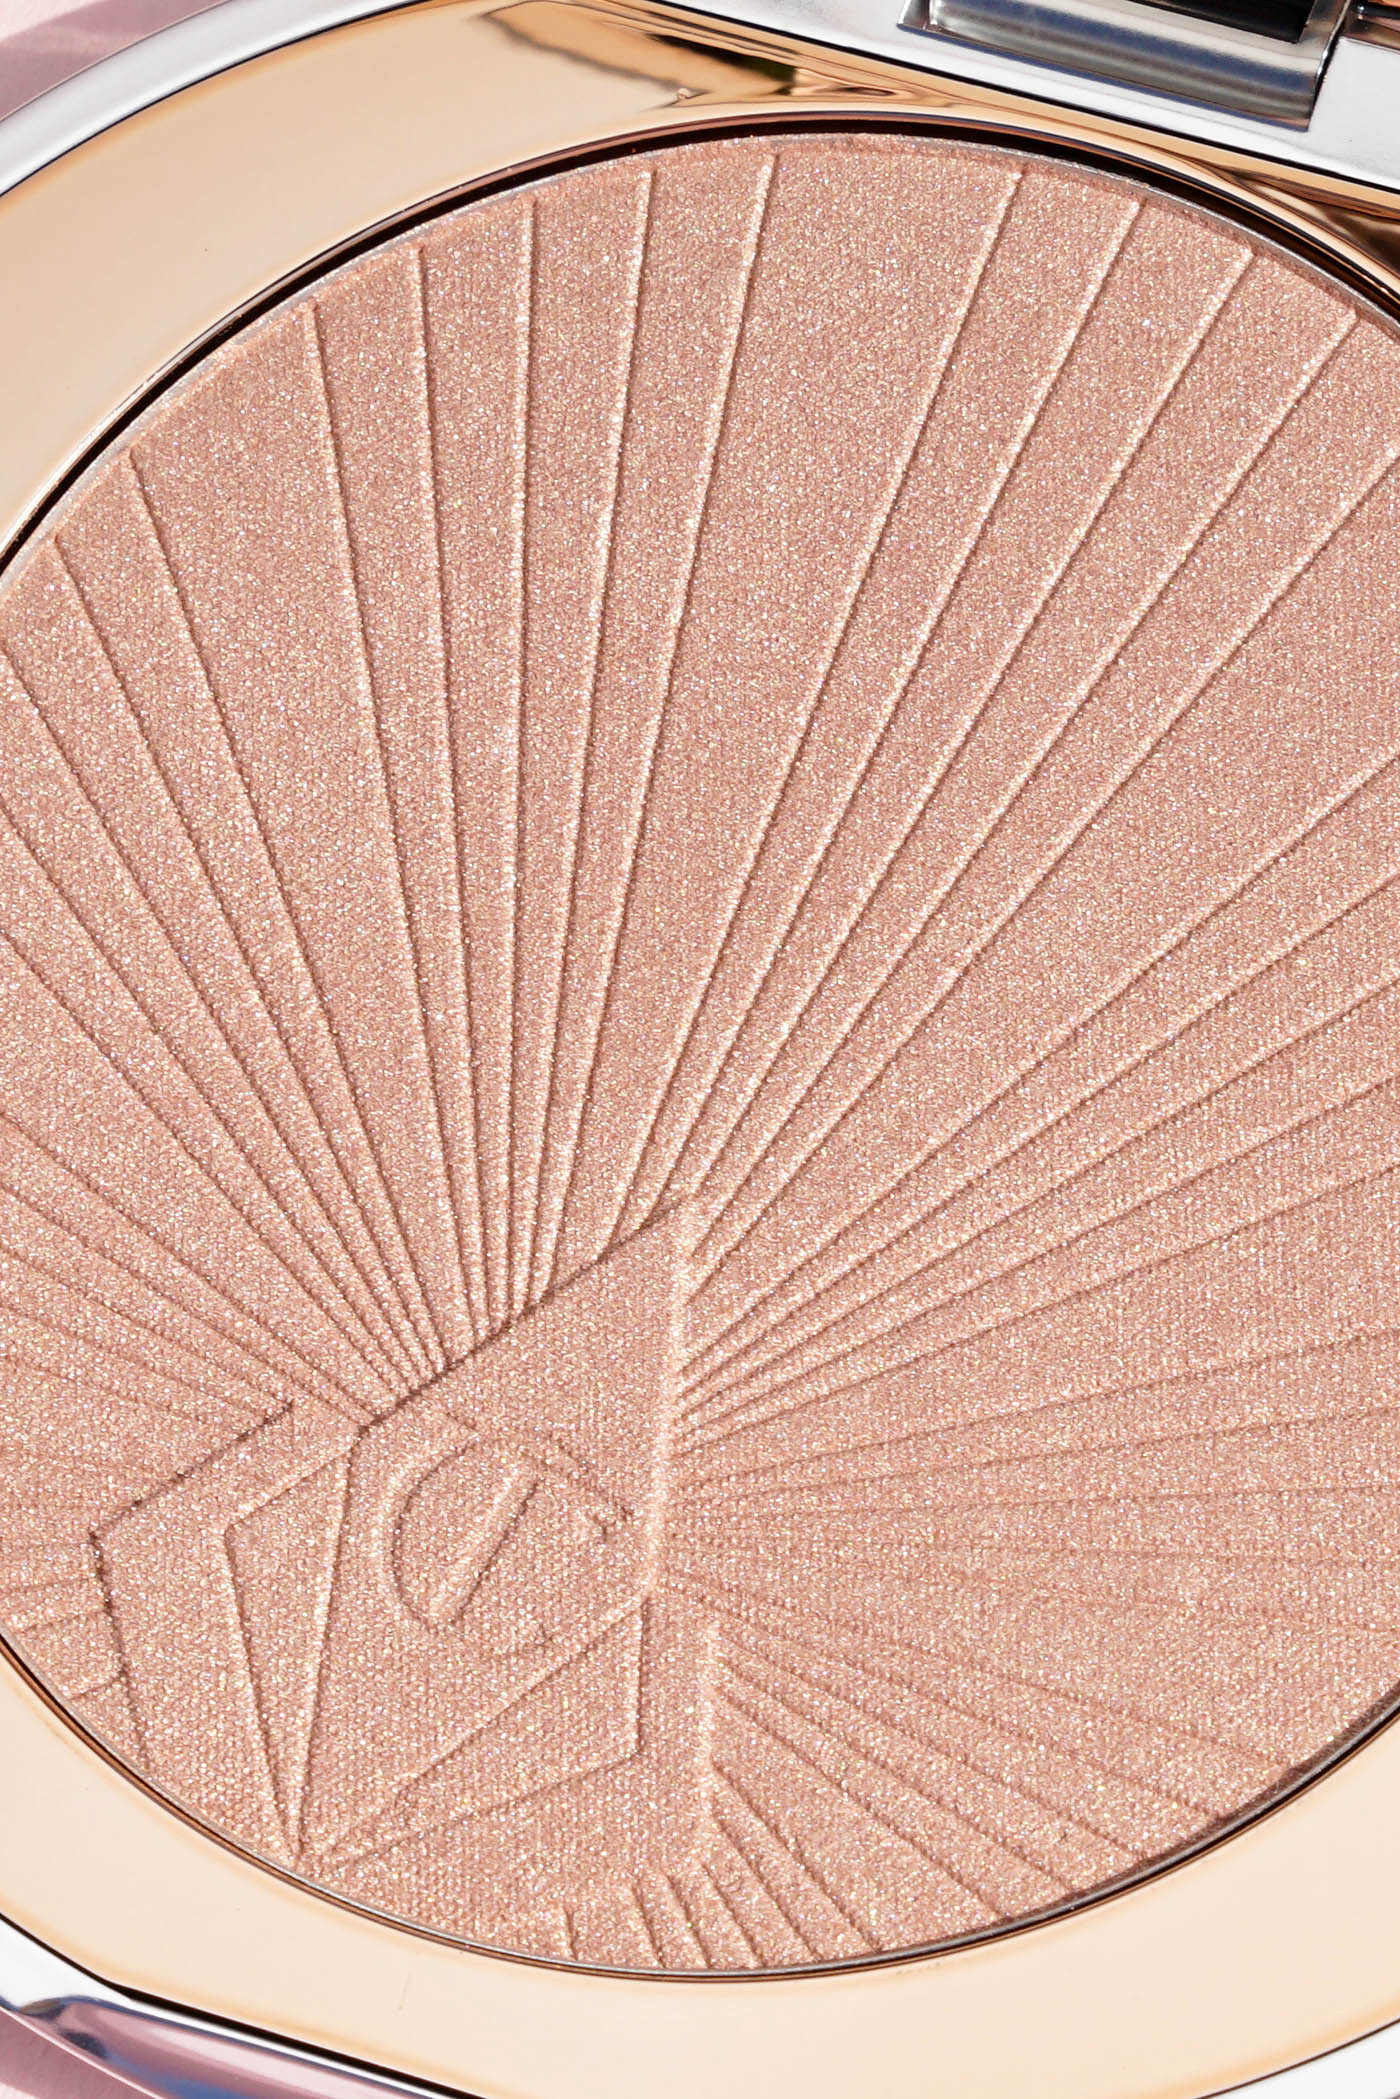 Charlotte Tilbury Hollywood Superstar Glow Highlighter review | The Beauty Look Book